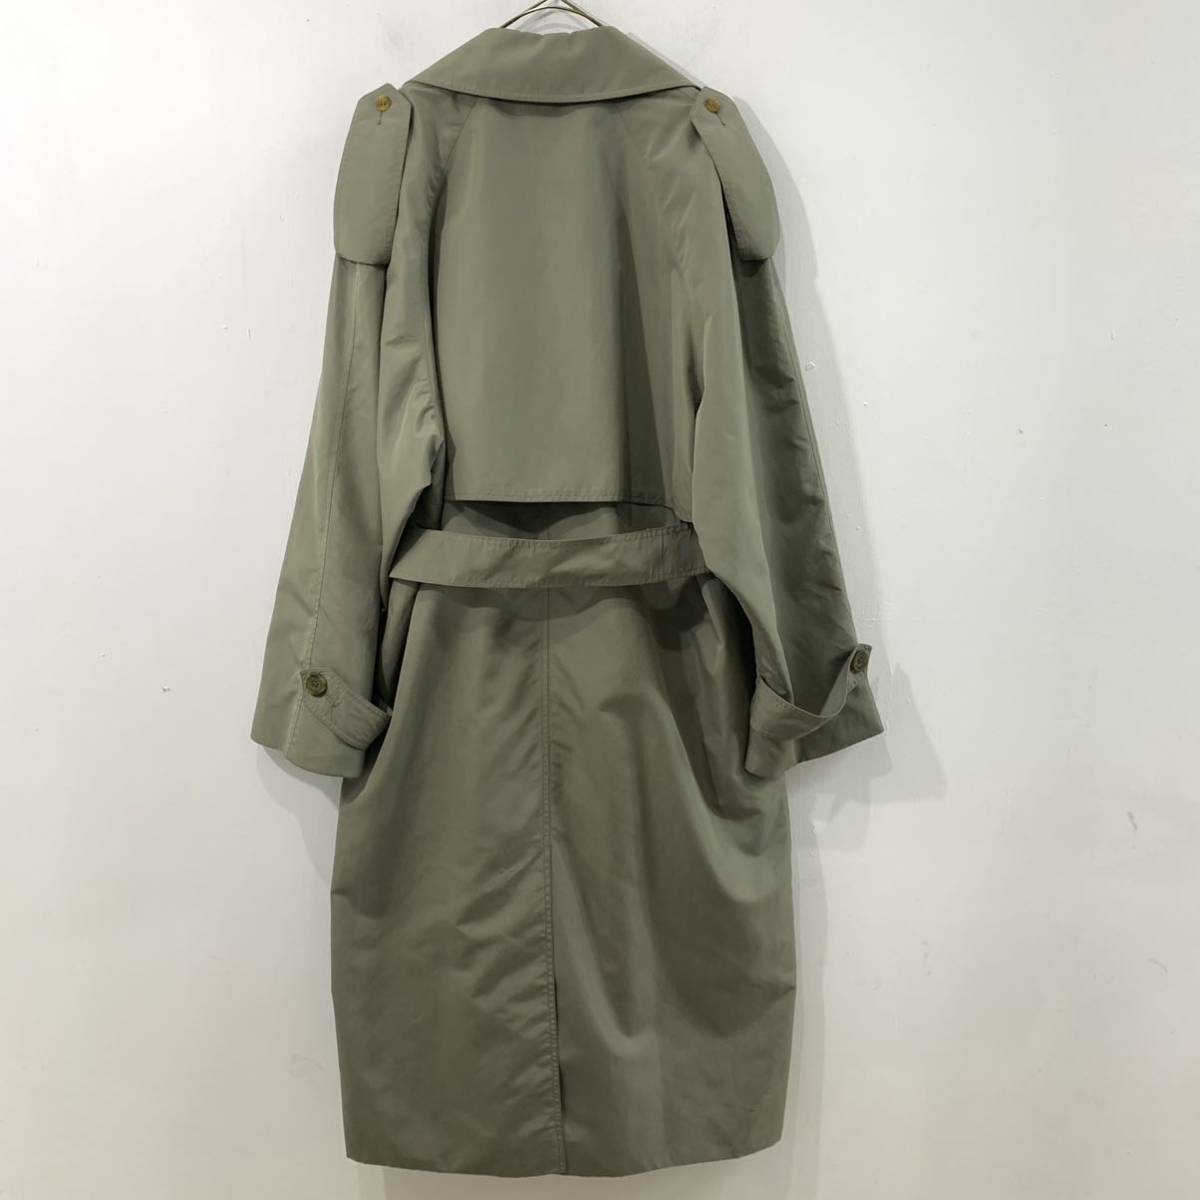 Aquascutum trench coat Canada made long coat la gran sleeve belt attaching VINTAGE Epo let Aquascutum [ uniform carriage / including in a package possibility ]